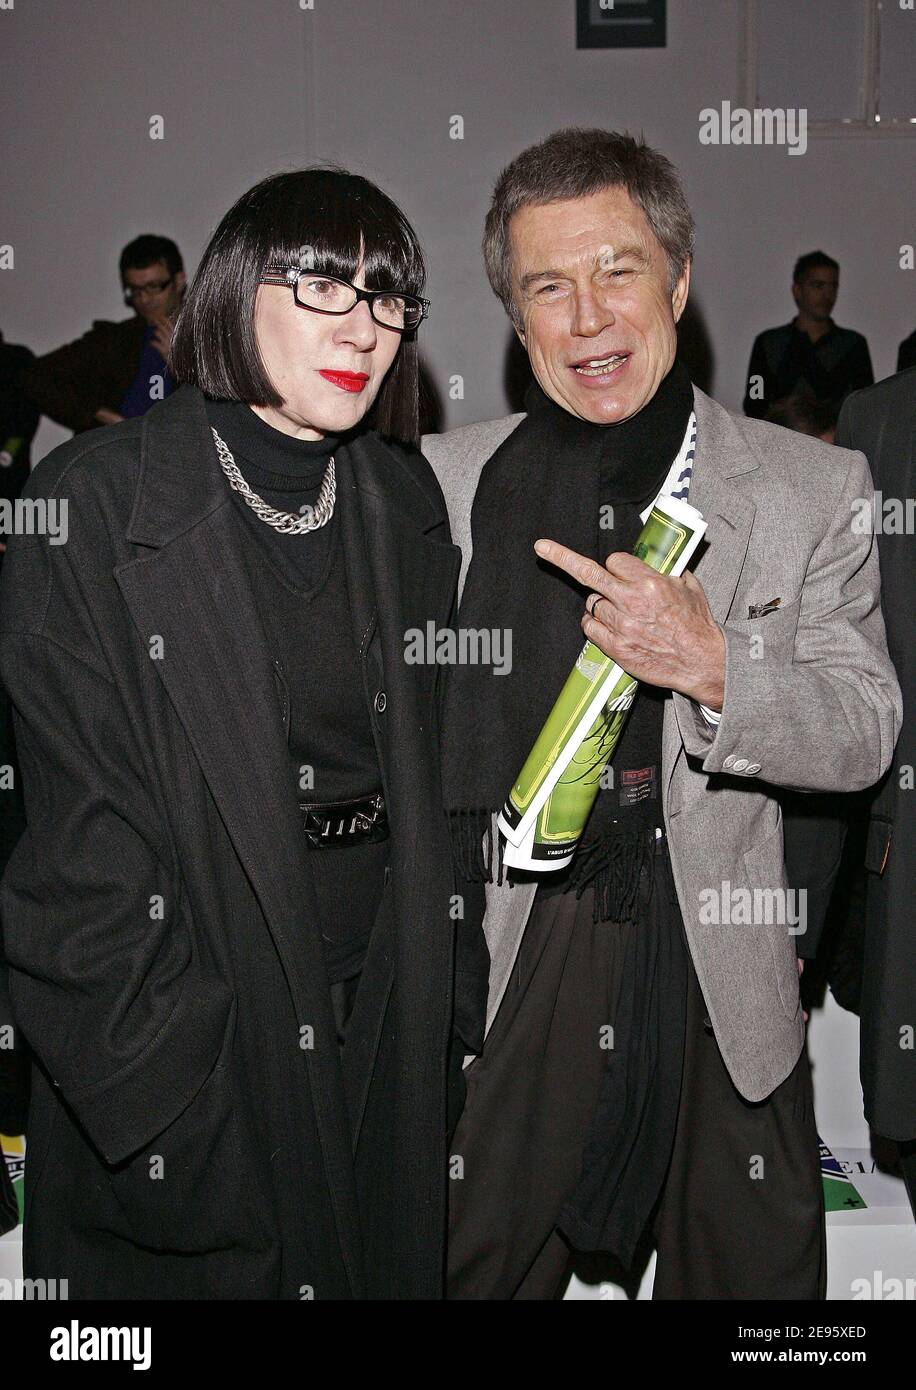 French designer Chantal Thomass and director Jean-Paul Goude attend  Jean-Charles de Castelbajac's Ready-to-Wear Fall-Winter 2006-2007  collection presentation, held at 'Le Musee De l'Homme' in Paris, France, on  February 27, 2006. Photo by